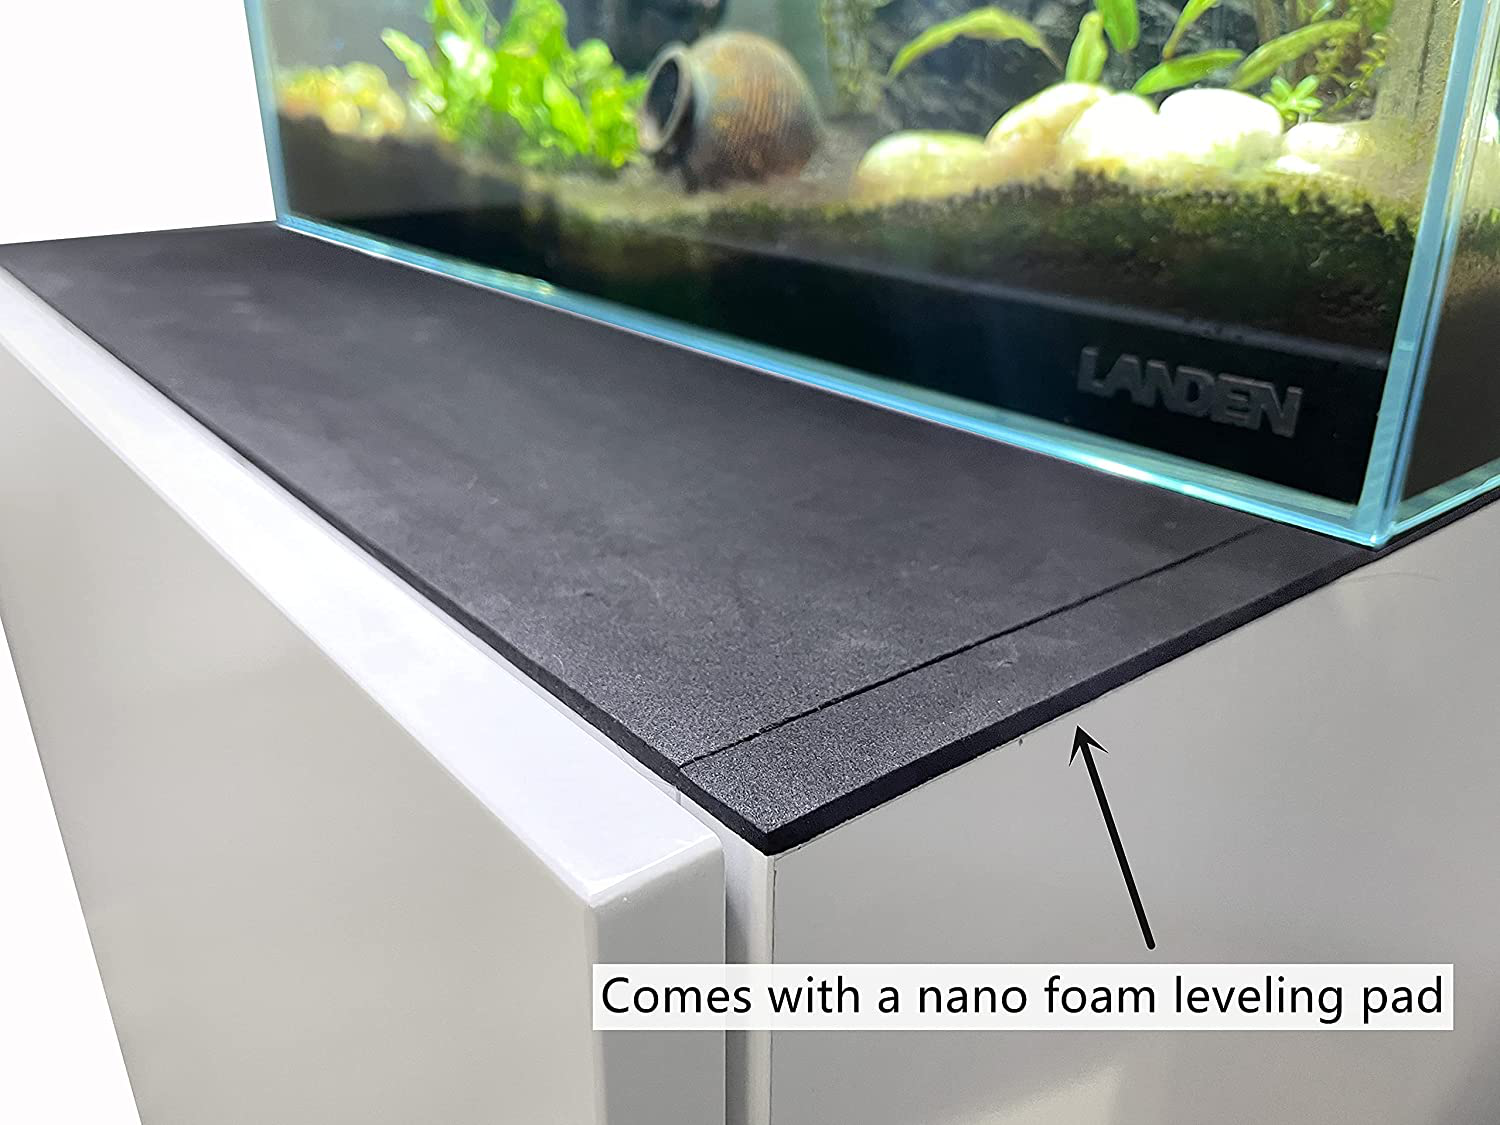 LANDEN Aquarium Stand and Cabinet, Random Color for Clearance for Fish Tank, Nano Foam Leveling Mat Included, Contemporary and Simple Design, Wooden Gloss White or Black Painted(Stand Only)